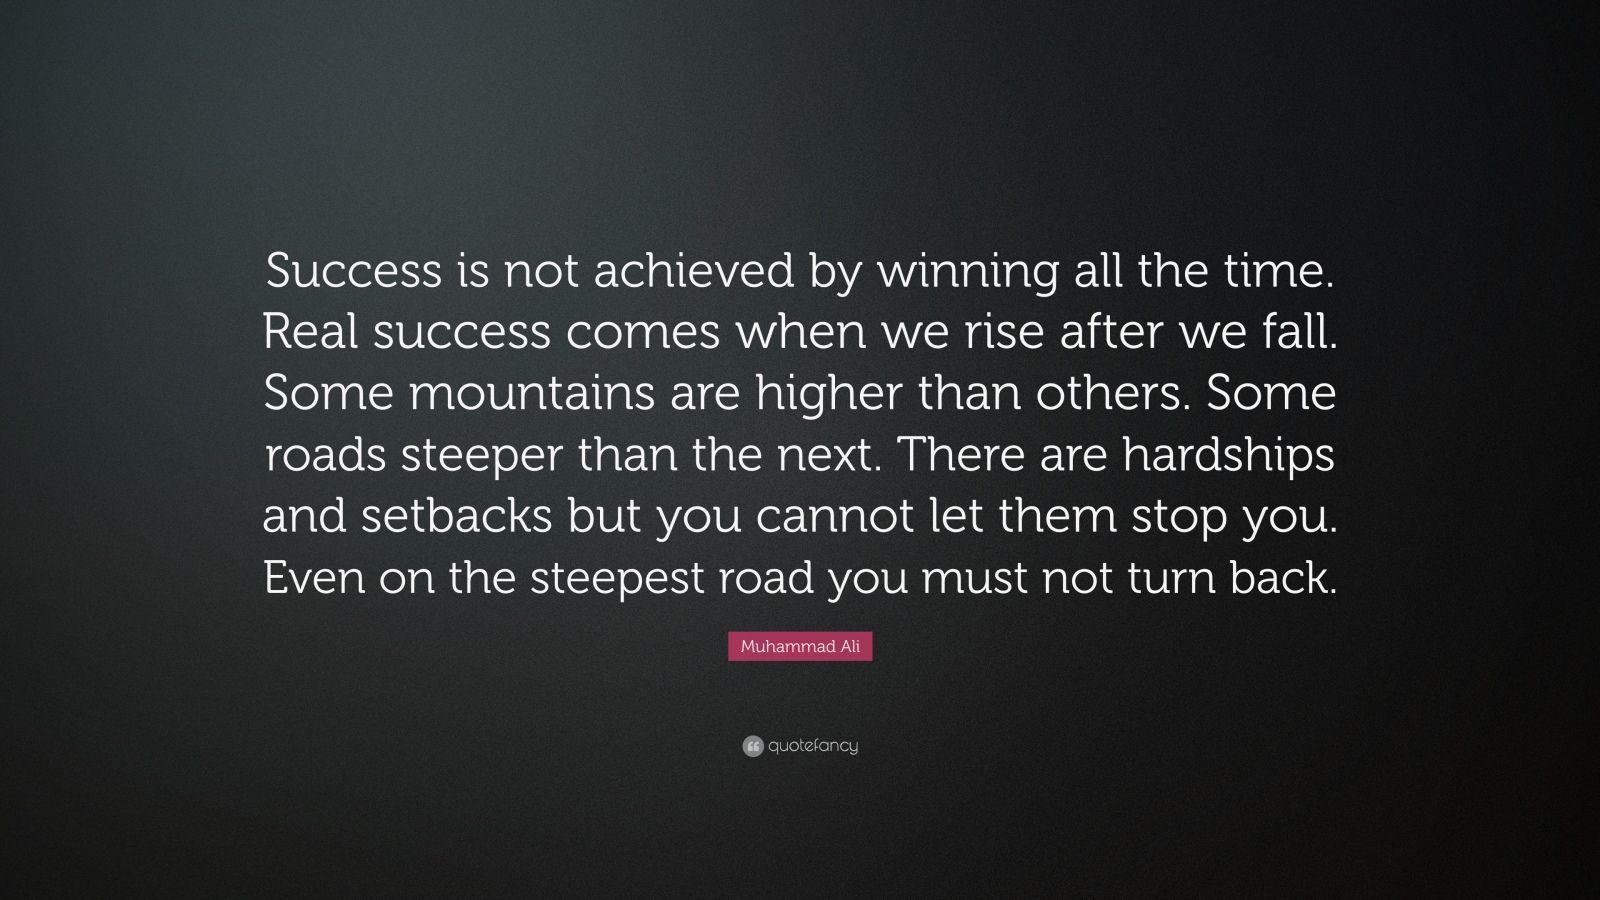 Muhammad Ali Quote: “Success is not achieved by winning all the time. Real success comes when we rise after we fall. Some mountains are highe.” (12 wallpaper)